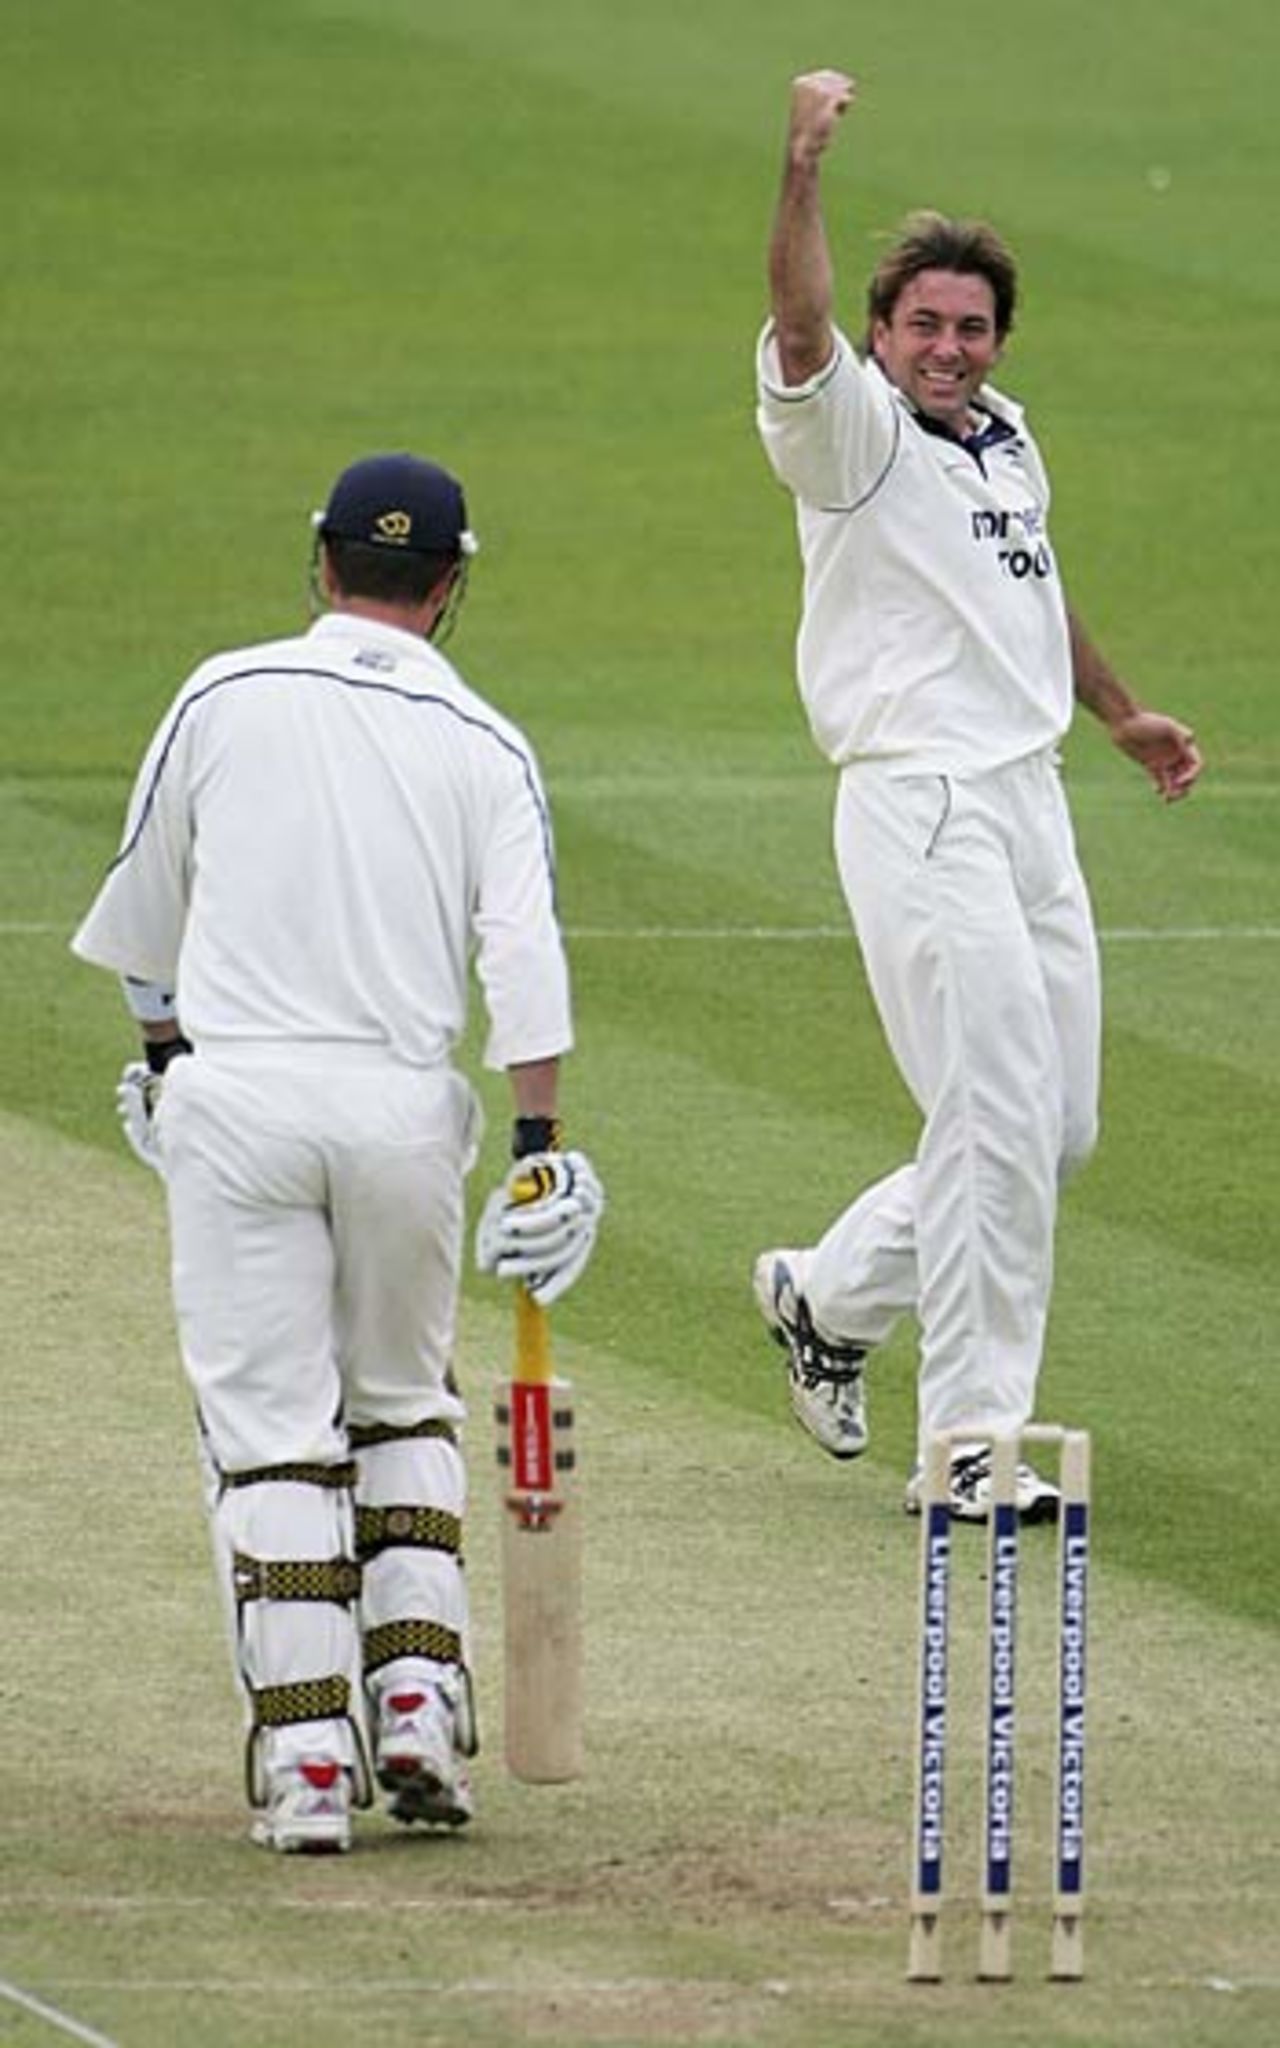 Chris Silverwood strikes an early blow to remove Robert Key, Middlesex v Kent, Lord's, April 27, 2006